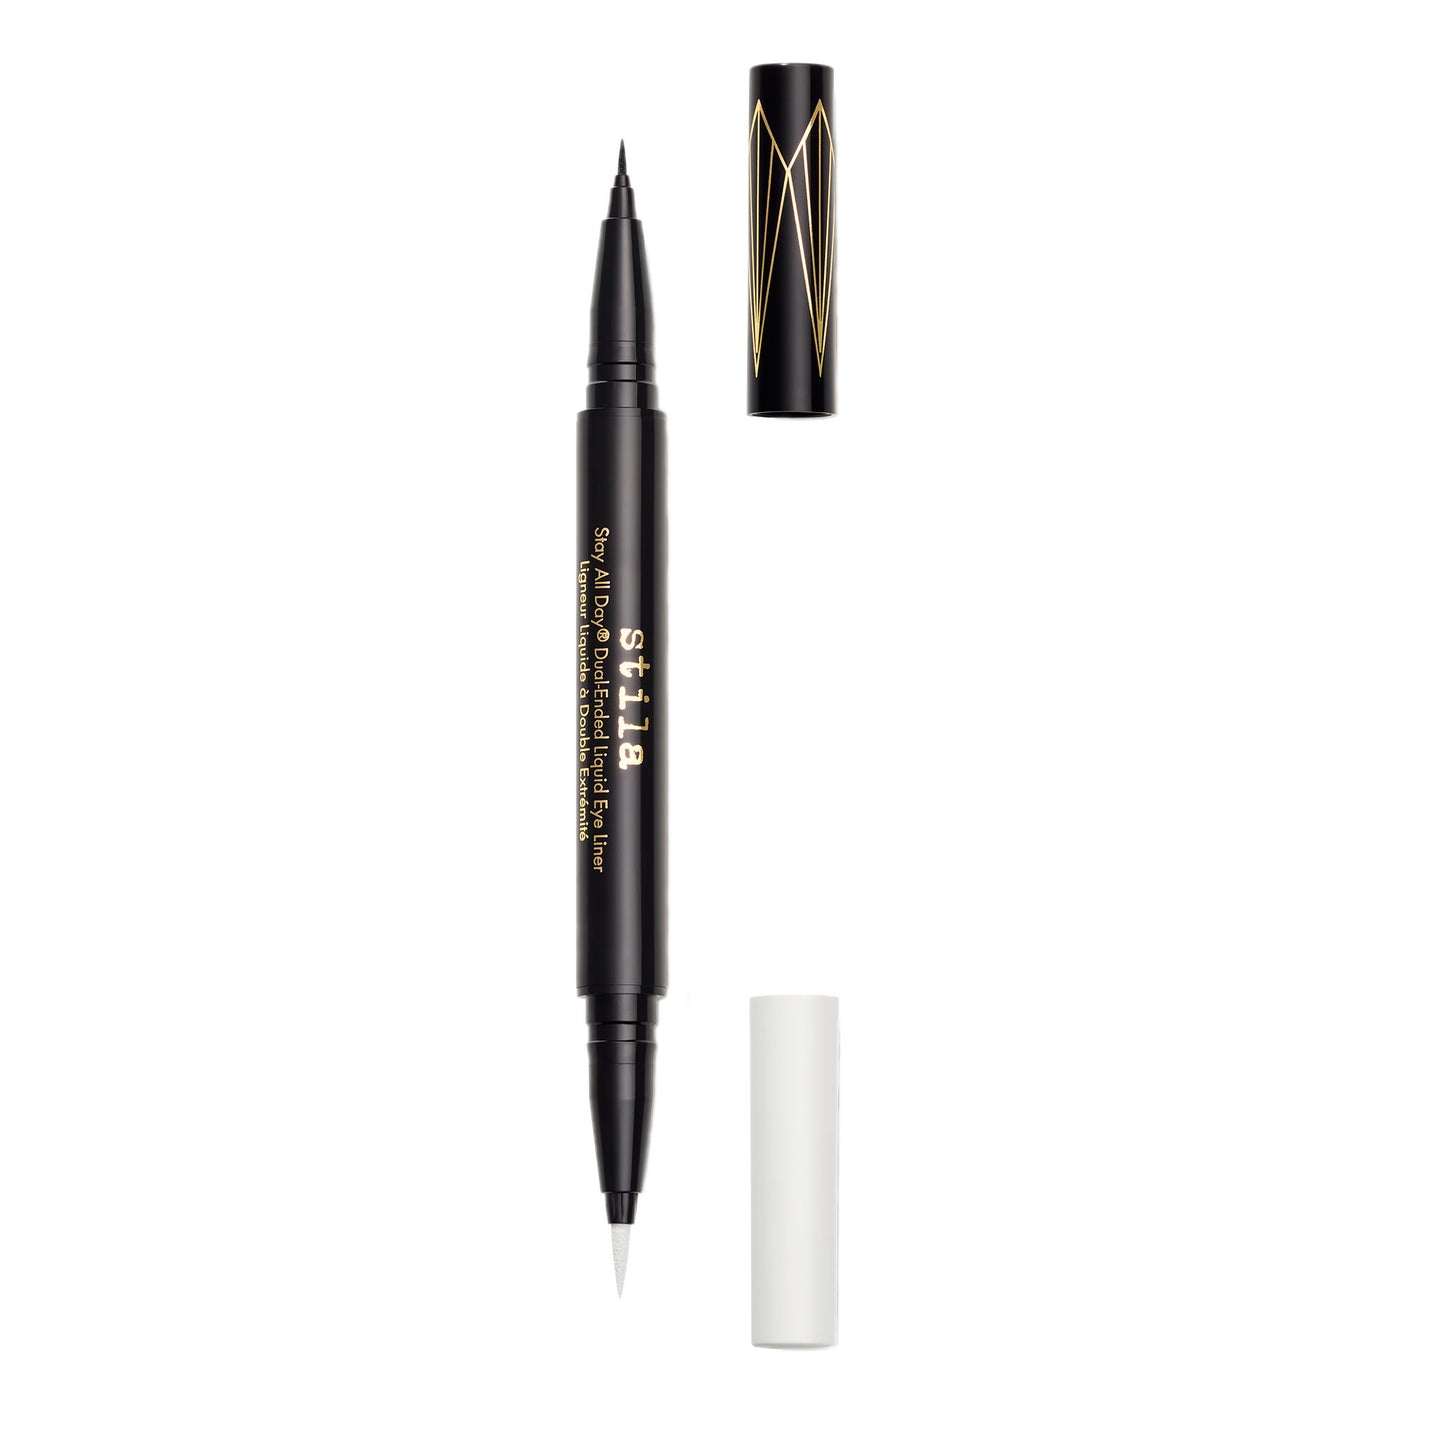 Load image into Gallery viewer, Stila Stay All Day® Dual-Ended Waterproof Liquid Eye Liner: Two Colours - Intense Black and Snow
